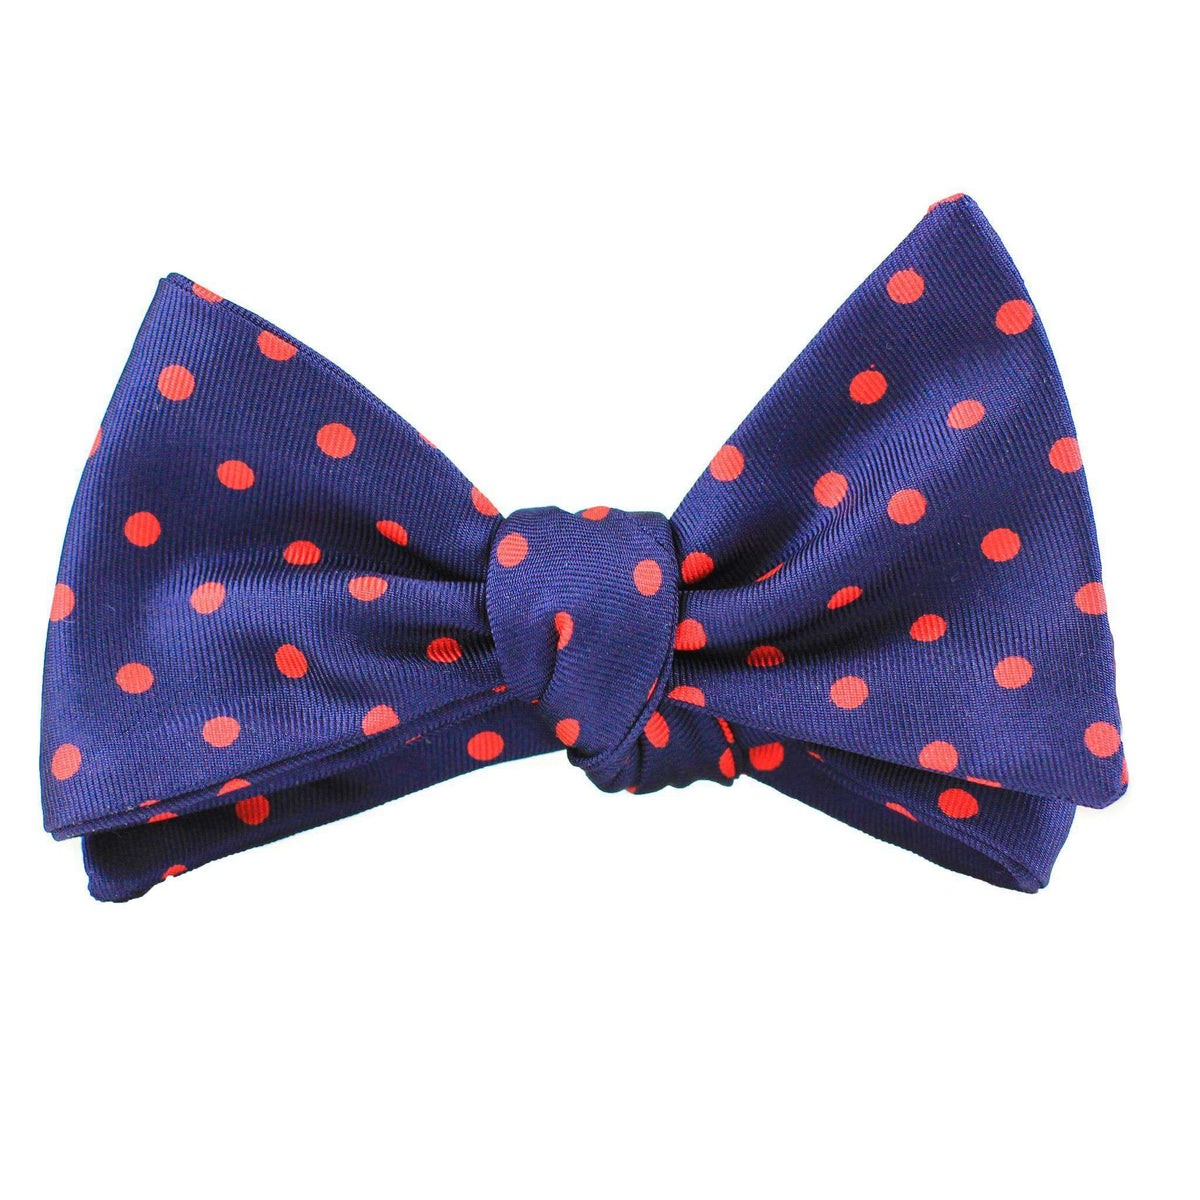 Silk Bow Tie in Navy with Red Dots by Res Ipsa - Country Club Prep